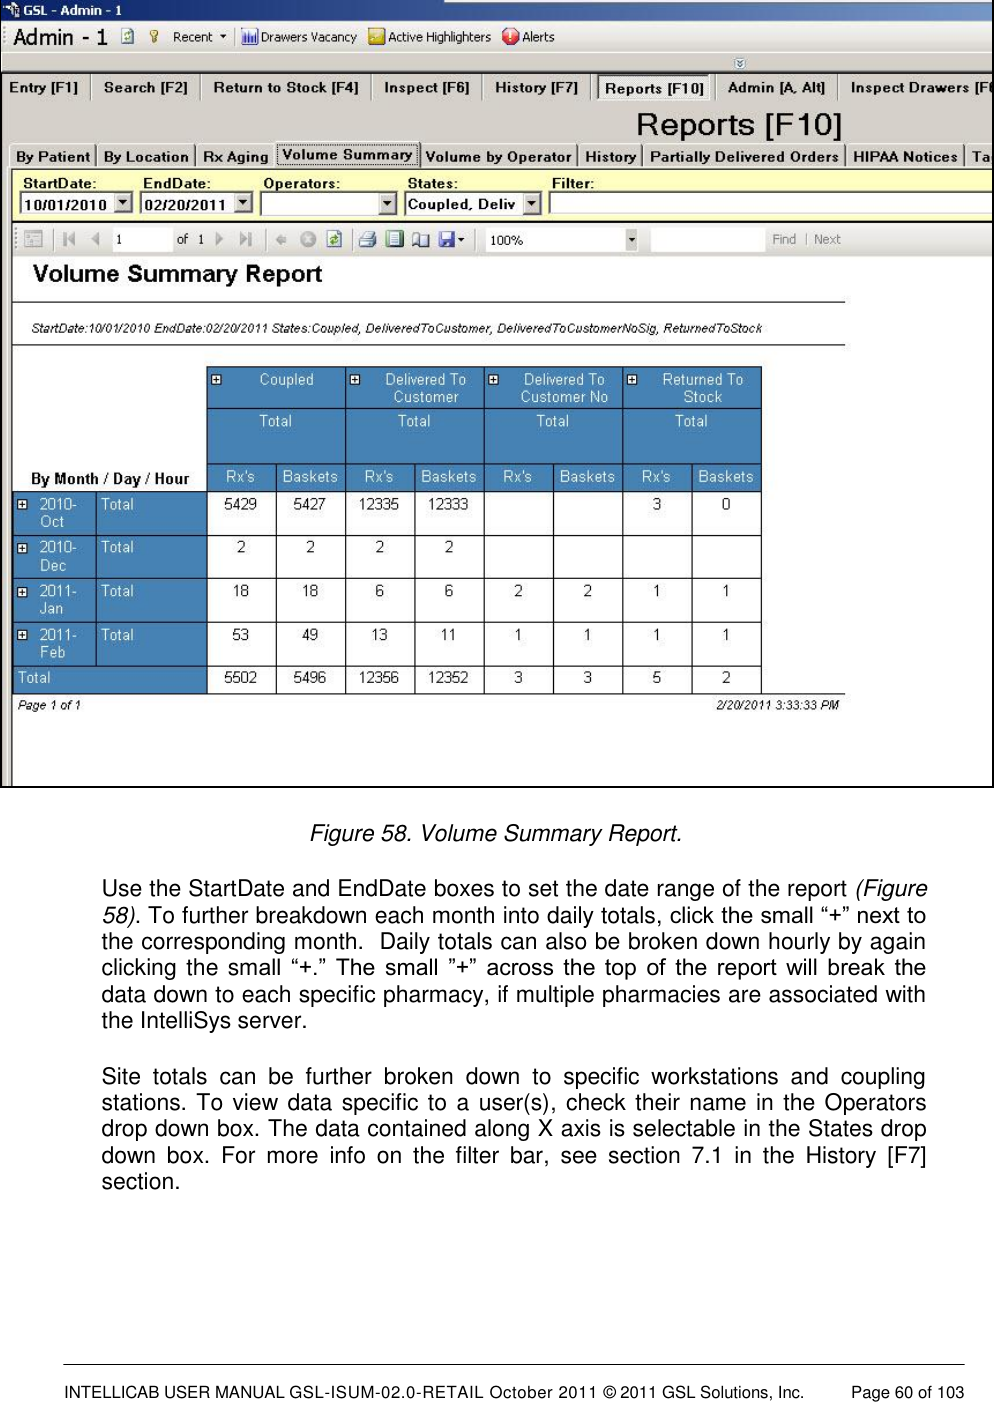  INTELLICAB USER MANUAL GSL-ISUM-02.0-RETAIL October 2011 © 2011 GSL Solutions, Inc.   Page 60 of 103    Figure 58. Volume Summary Report. Use the StartDate and EndDate boxes to set the date range of the report (Figure 58). To further breakdown each month into daily totals, click the small “+” next to the corresponding month.  Daily totals can also be broken down hourly by again clicking the small  “+.” The  small  ”+”  across  the  top  of  the  report  will  break  the data down to each specific pharmacy, if multiple pharmacies are associated with the IntelliSys server.  Site  totals  can  be  further  broken  down  to  specific  workstations  and  coupling stations. To view data specific to a user(s), check their name in the Operators drop down box. The data contained along X axis is selectable in the States drop down  box.  For  more  info  on  the  filter  bar,  see  section  7.1  in  the  History  [F7] section. 